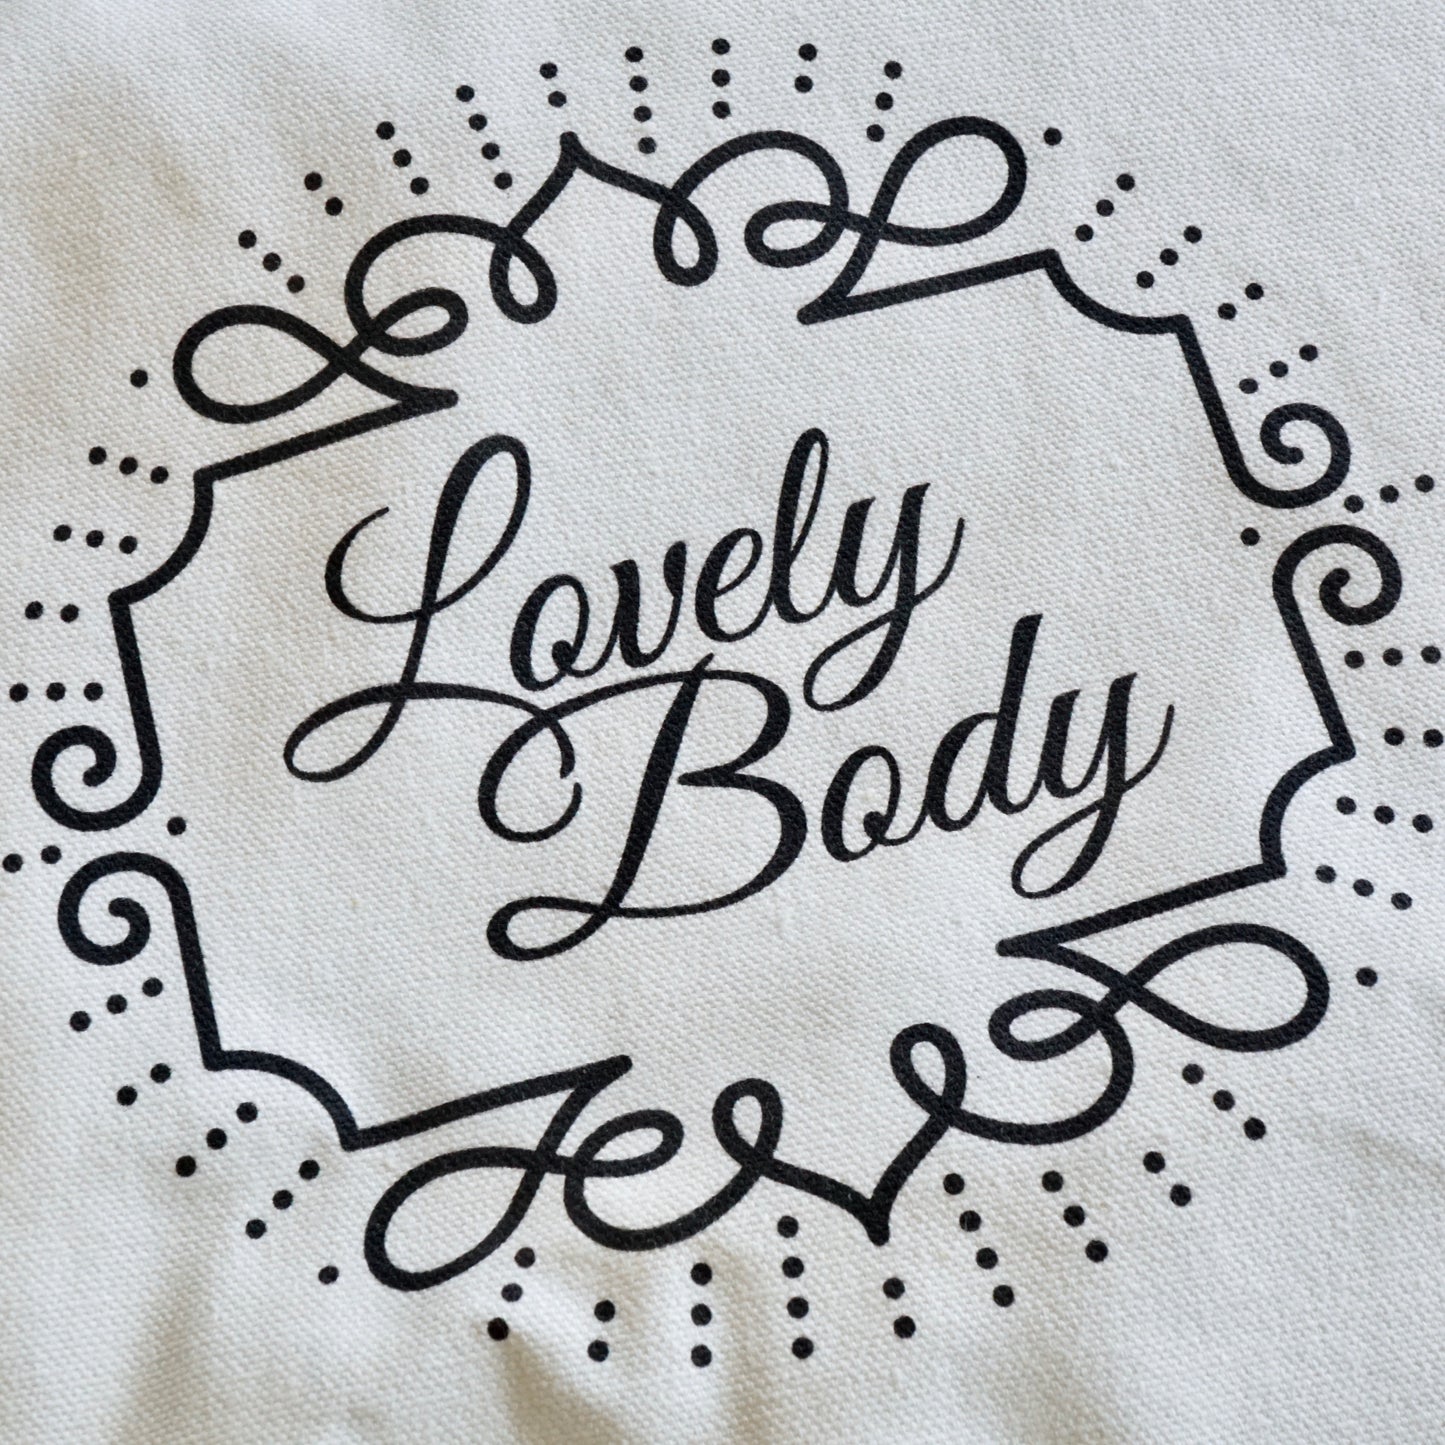 Lovely Body Cotton Tote Bag - Black and White